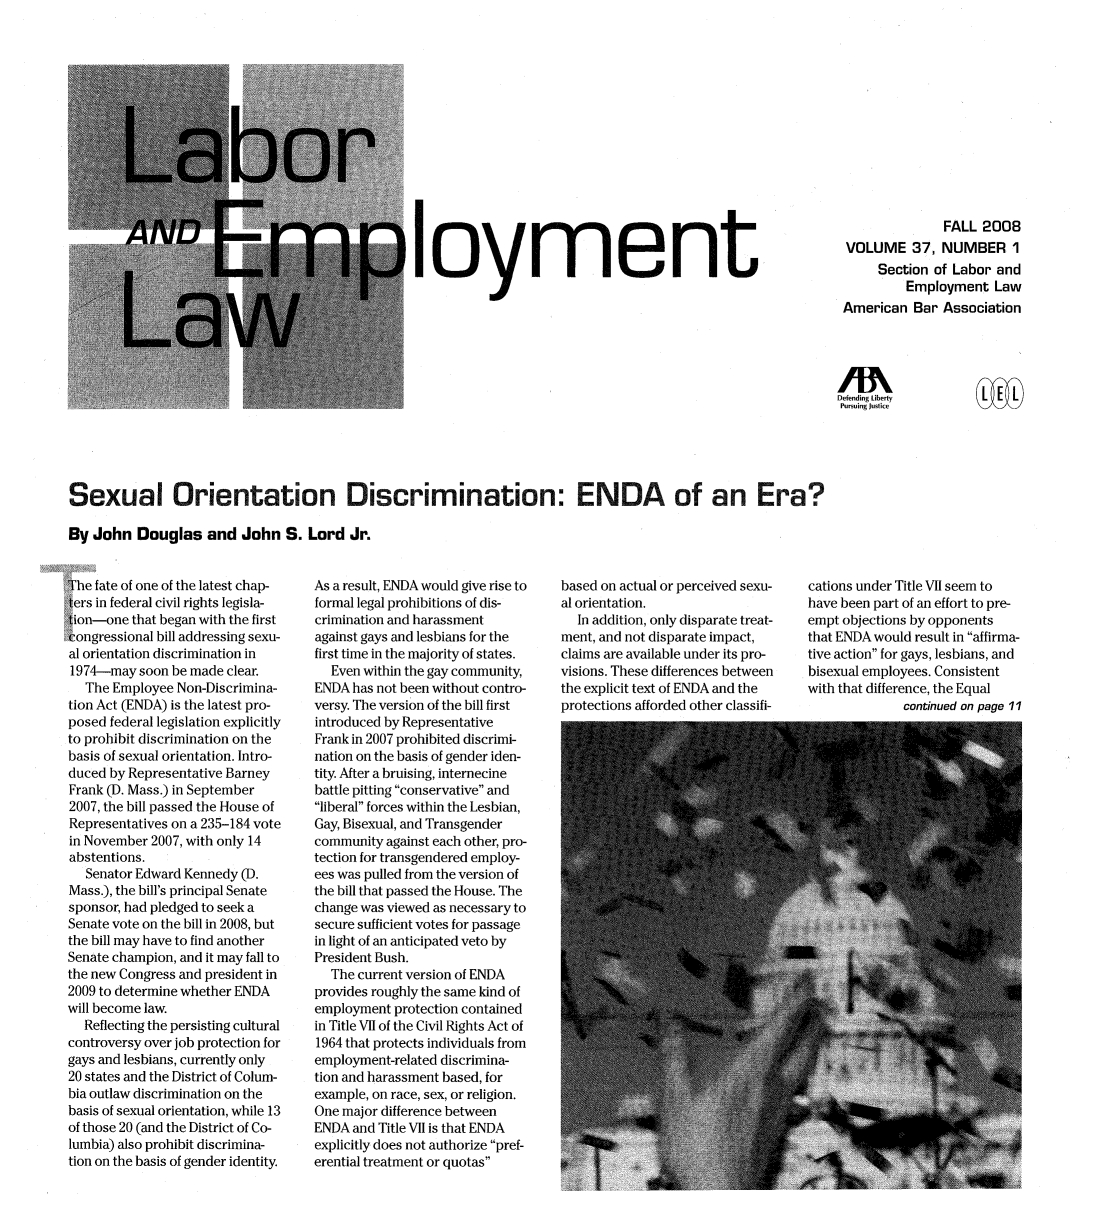 handle is hein.journals/laboemplo37 and id is 1 raw text is: loymentFALL 2008VOLUME 37, NUMBER 1Section of Labor andEmployment LawAmerican Bar AssociationDefending LibertyPursuing JusticeSexual Orientation Discrimination: ENDA of an Era?By John Douglas and John S. Lord Jr.The fate of one of the latest chap-ters in federal civil rights legisla-tion-one that began with the firstiongressional bill addressing sexu-al orientation discrimination in1974-may soon be made clear.The Employee Non-Discrimina-tion Act (ENDA) is the latest pro-posed federal legislation explicitlyto prohibit discrimination on thebasis of sexual orientation. Intro-duced by Representative BarneyFrank (D. Mass.) in September2007, the bill passed the House ofRepresentatives on a 235-184 votein November 2007, with only 14abstentions.Senator Edward Kennedy (D.Mass.), the bill's principal Senatesponsor, had pledged to seek aSenate vote on the bill in 2008, butthe bill may have to find anotherSenate champion, and it may fall tothe new Congress and president in2009 to determine whether ENDAwill become law.Reflecting the persisting culturalcontroversy over job protection forgays and lesbians, currently only20 states and the District of Colum-bia outlaw discrimination on thebasis of sexual orientation, while 13of those 20 (and the District of Co-lumbia) also prohibit discrimina-tion on the basis of gender identity.As a result, ENDA would give rise toformal legal prohibitions of dis-crimination and harassmentagainst gays and lesbians for thefirst time in the majority of states.Even within the gay community,ENDA has not been without contro-versy. The version of the bill firstintroduced by RepresentativeFrank in 2007 prohibited discrimi-nation on the basis of gender iden-tity. After a bruising, internecinebattle pitting conservative andliberal forces within the Lesbian,Gay, Bisexual, and Transgendercommunity against each other, pro-tection for transgendered employ-ees was pulled from the version ofthe bill that passed the House. Thechange was viewed as necessary tosecure sufficient votes for passagein light of an anticipated veto byPresident Bush.The current version of ENDAprovides roughly the same kind ofemployment protection containedin Title VII of the Civil Rights Act of1964 that protects individuals fromemployment-related discrimina-tion and harassment based, forexample, on race, sex, or religion.One major difference betweenENDA and Title VII is that ENDAexplicitly does not authorize pref-erential treatment or quotasbased on actual or perceived sexu-al orientation.In addition, only disparate treat-ment, and not disparate impact,claims are available under its pro-visions. These differences betweenthe explicit text of ENDA and theprotections afforded other classifi-cations under Title VII seem tohave been part of an effort to pre-empt objections by opponentsthat ENDA would result in affirma-tive action for gays, lesbians, andbisexual employees. Consistentwith that difference, the Equalcontinued on page 11